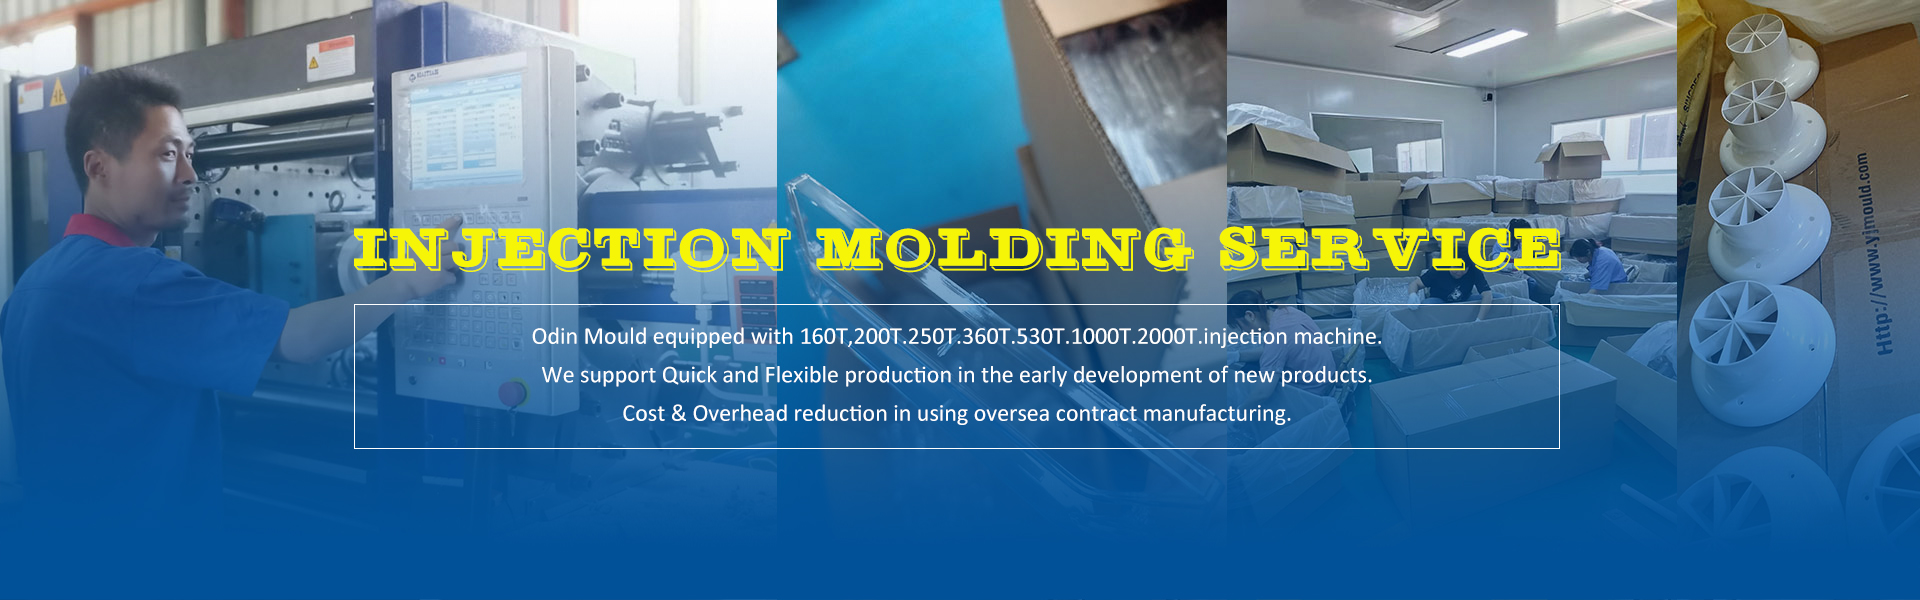 INJECTION MOLDING SERVICE 03